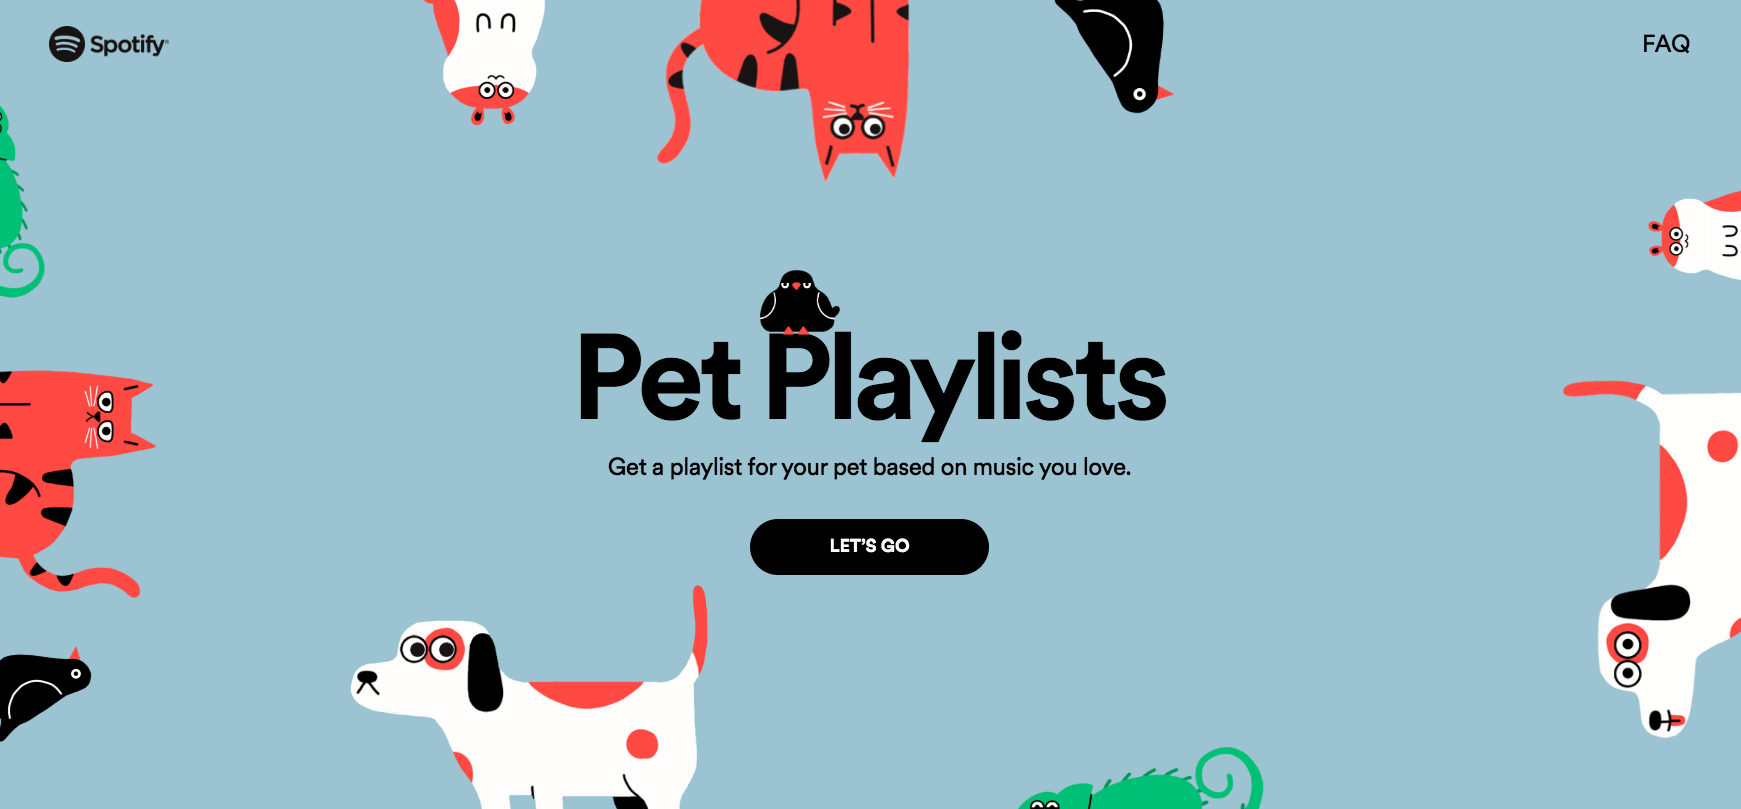 relaxing music for dogs spotify